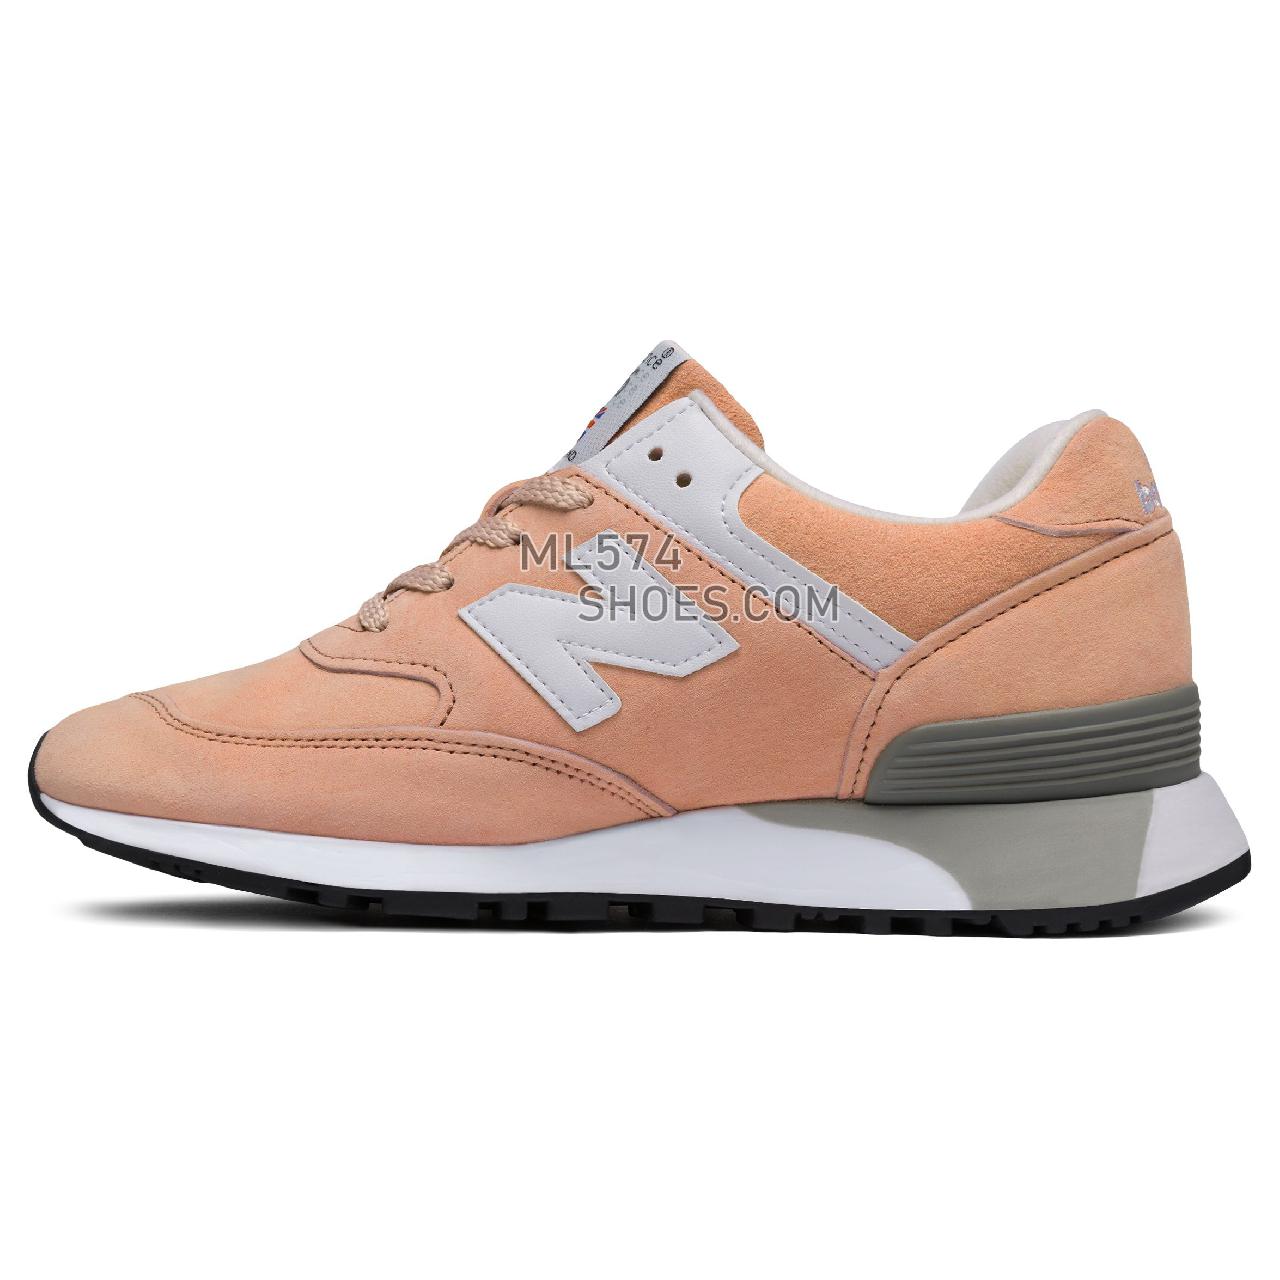 New Balance 576 Made in UK - Men's 576 Made in UK Classic W576-PS3 - Clay with White - W576LO